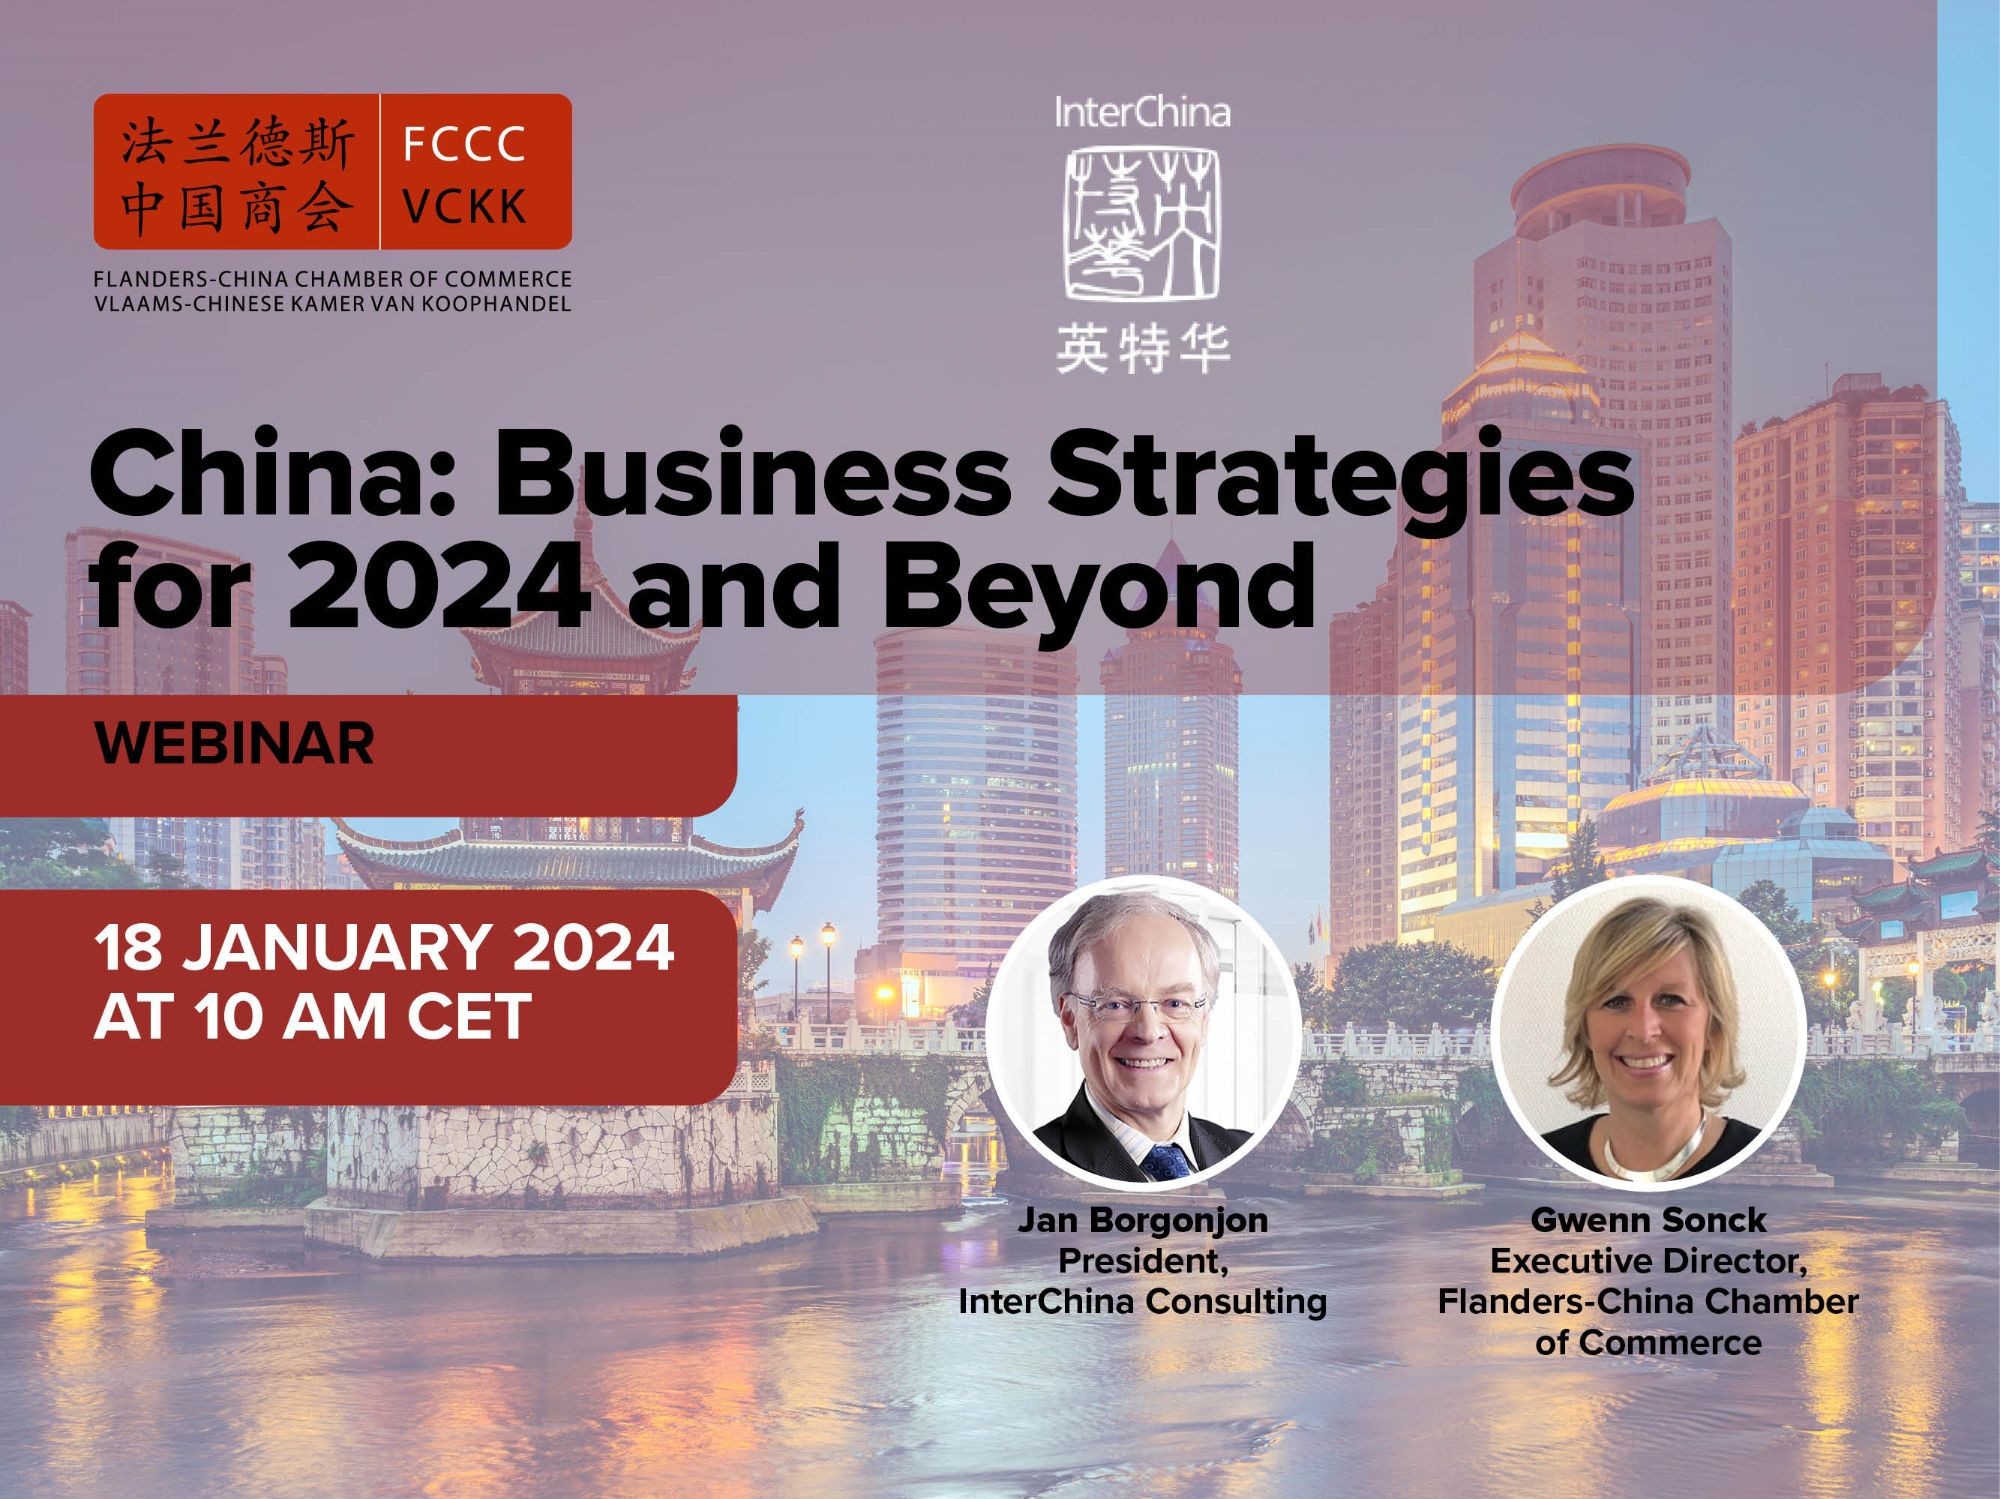 Webinar: China: Business Strategies for 2024 and Beyond - 18 January 2023 - 10h00 CET